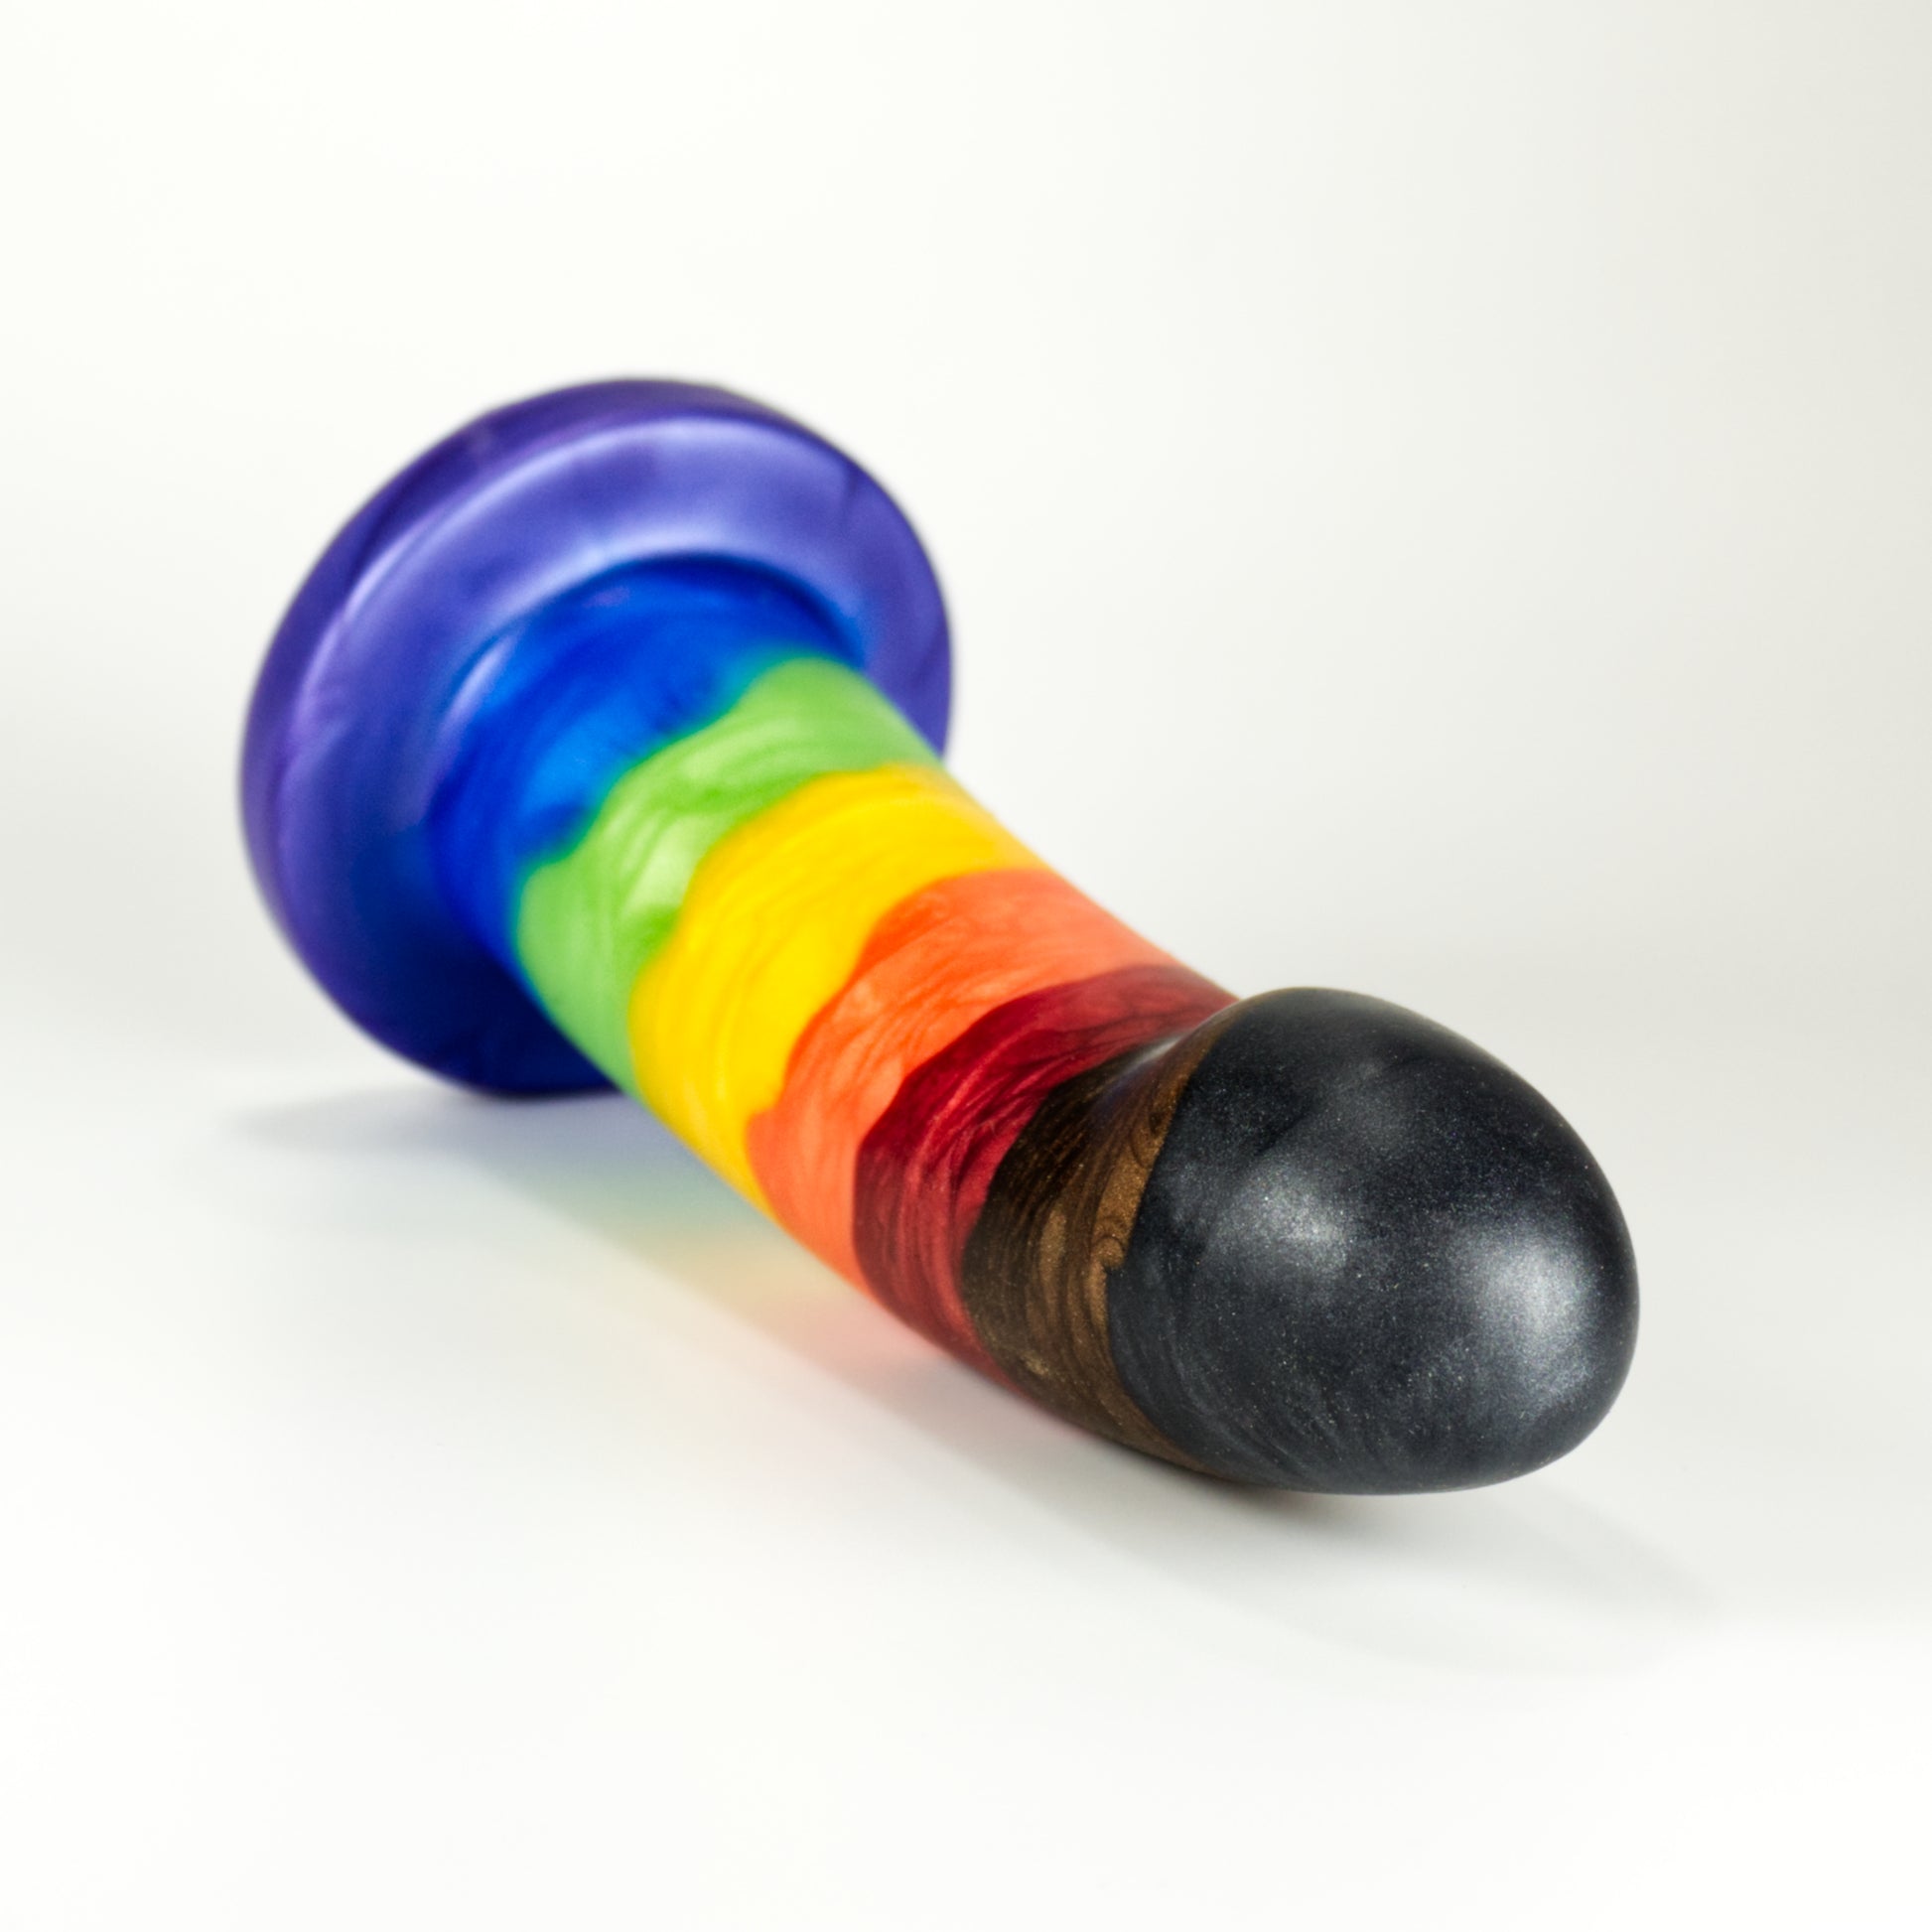 Top view of the Sidekick Medium, a dildo with a smooth cylinder shaped body, and a fingertip-shaped tip, and a pronounced cliff shape where they meet. The color is rainbow stripe with additional black and brown stripes at tip.